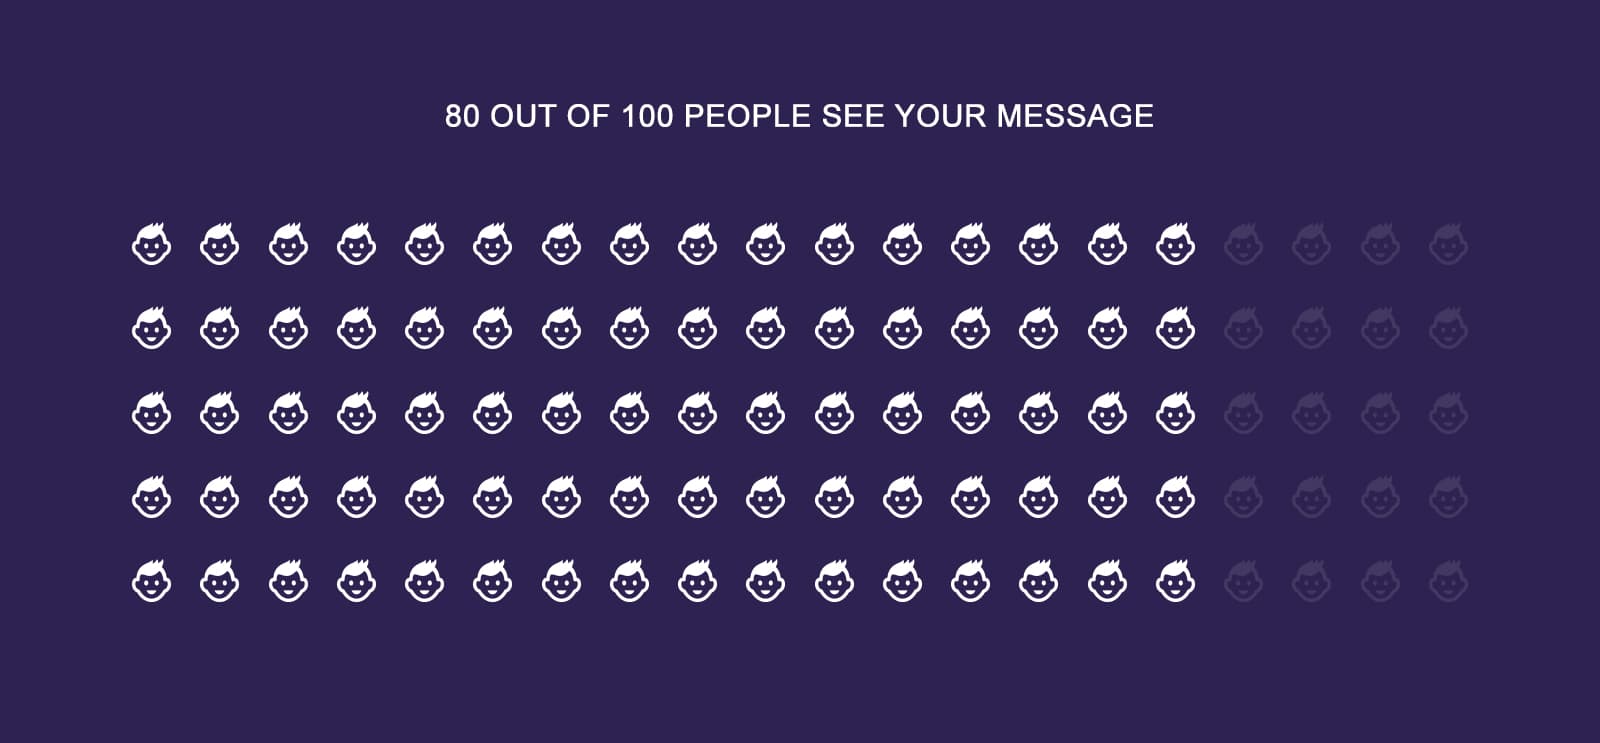 80 out of 100 people will see your message